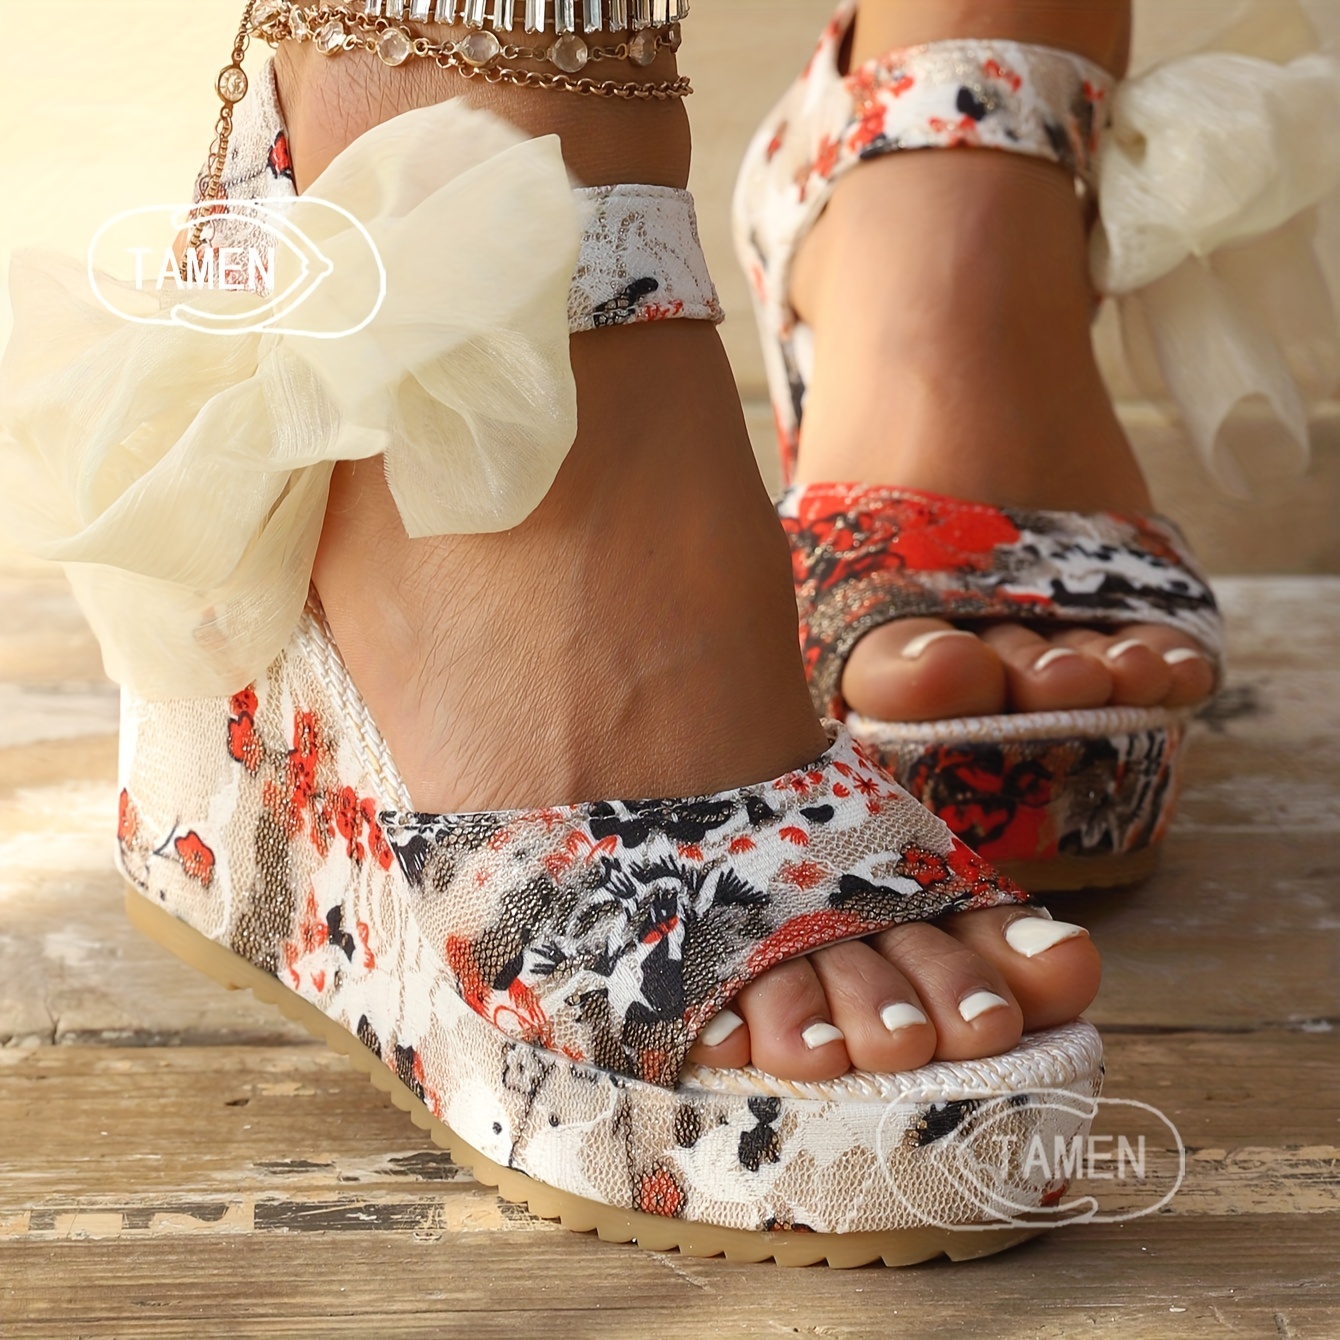 

Women's Flower Pattern Wedge Heeled Sandals, Casual Open Toe Platform Shoes, Comfortable Ankle Strap Sandals